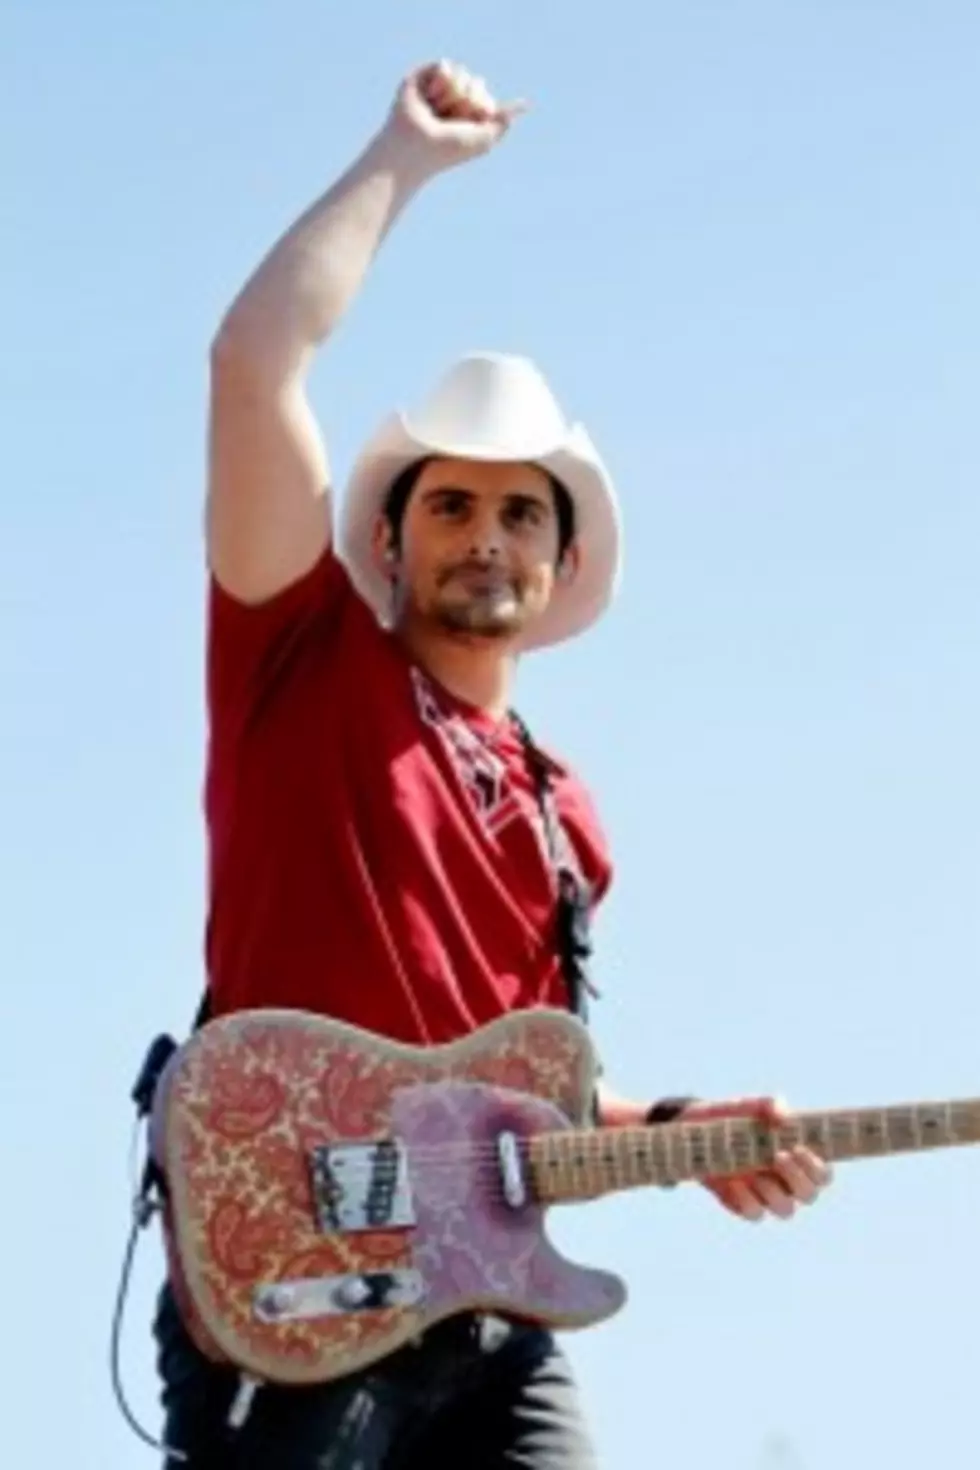 Brad Paisley, Craig Morgan, Kenny Rogers &#8211; Today In Country Music History